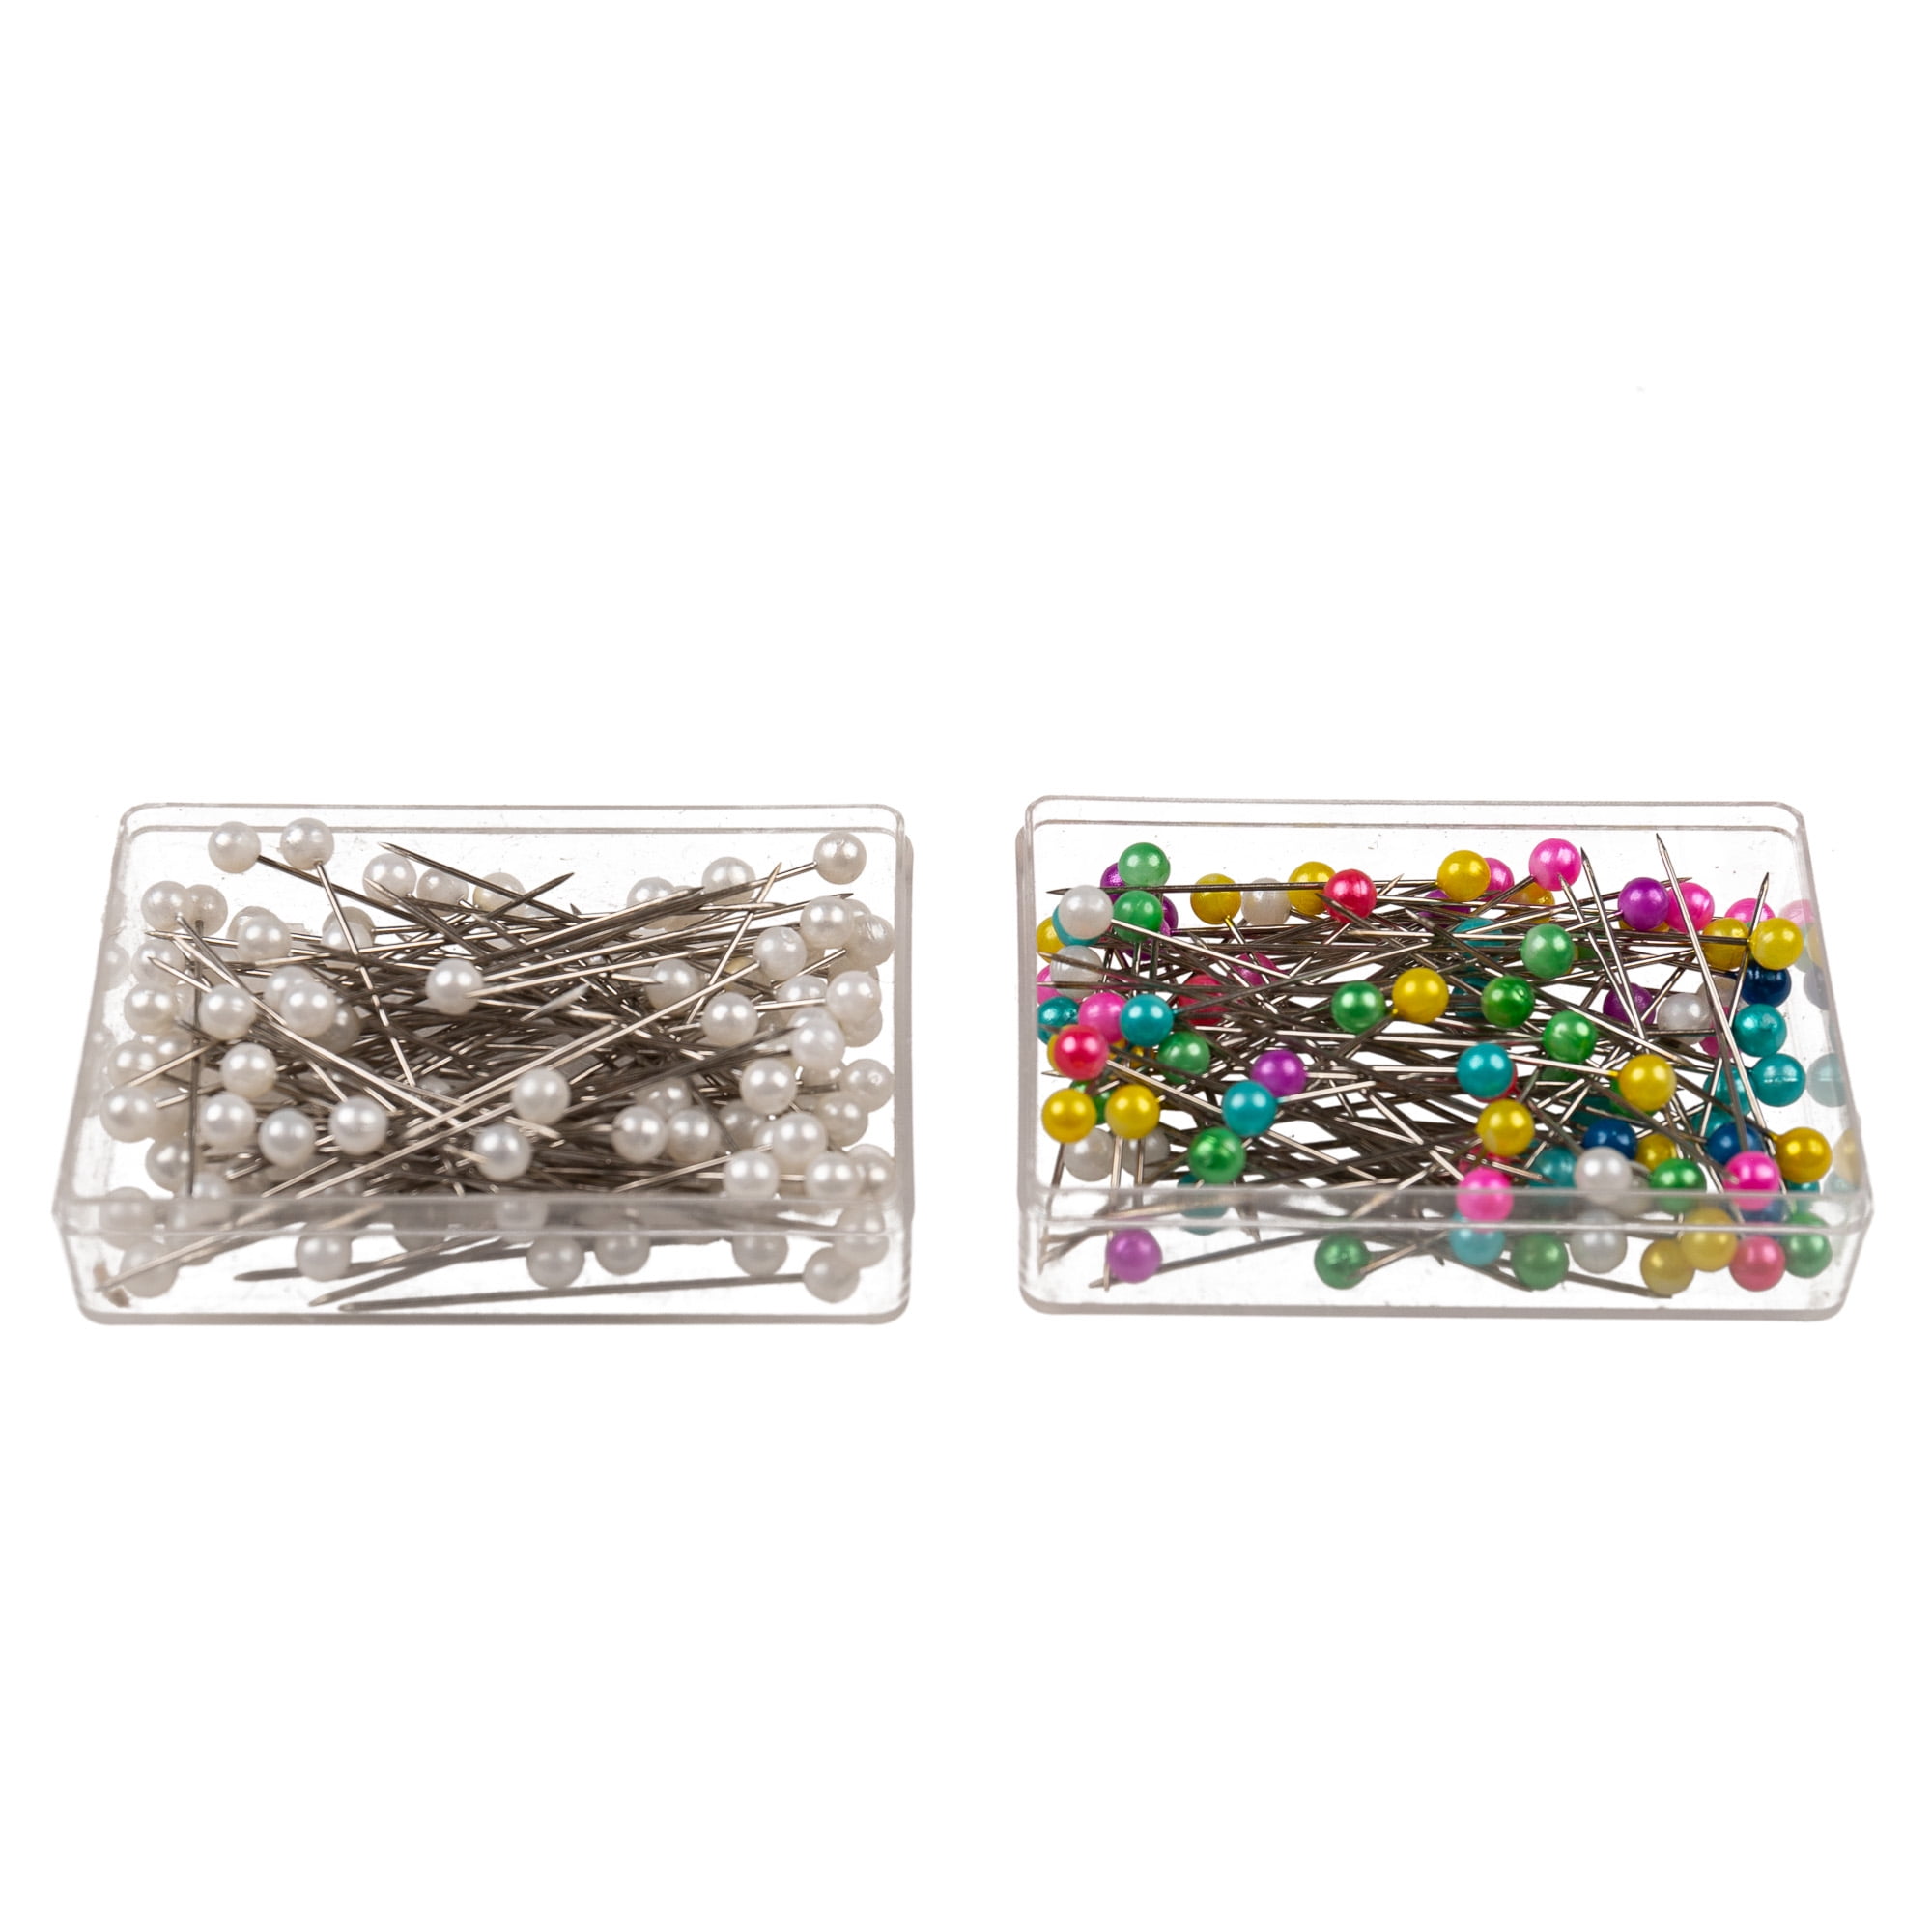  Watris Veiyi 800PCS Sewing Pins with Colored Heads, Round Pearl  Head Pins, Straight Pins Sewing, Sewing Fixed Marking Tool